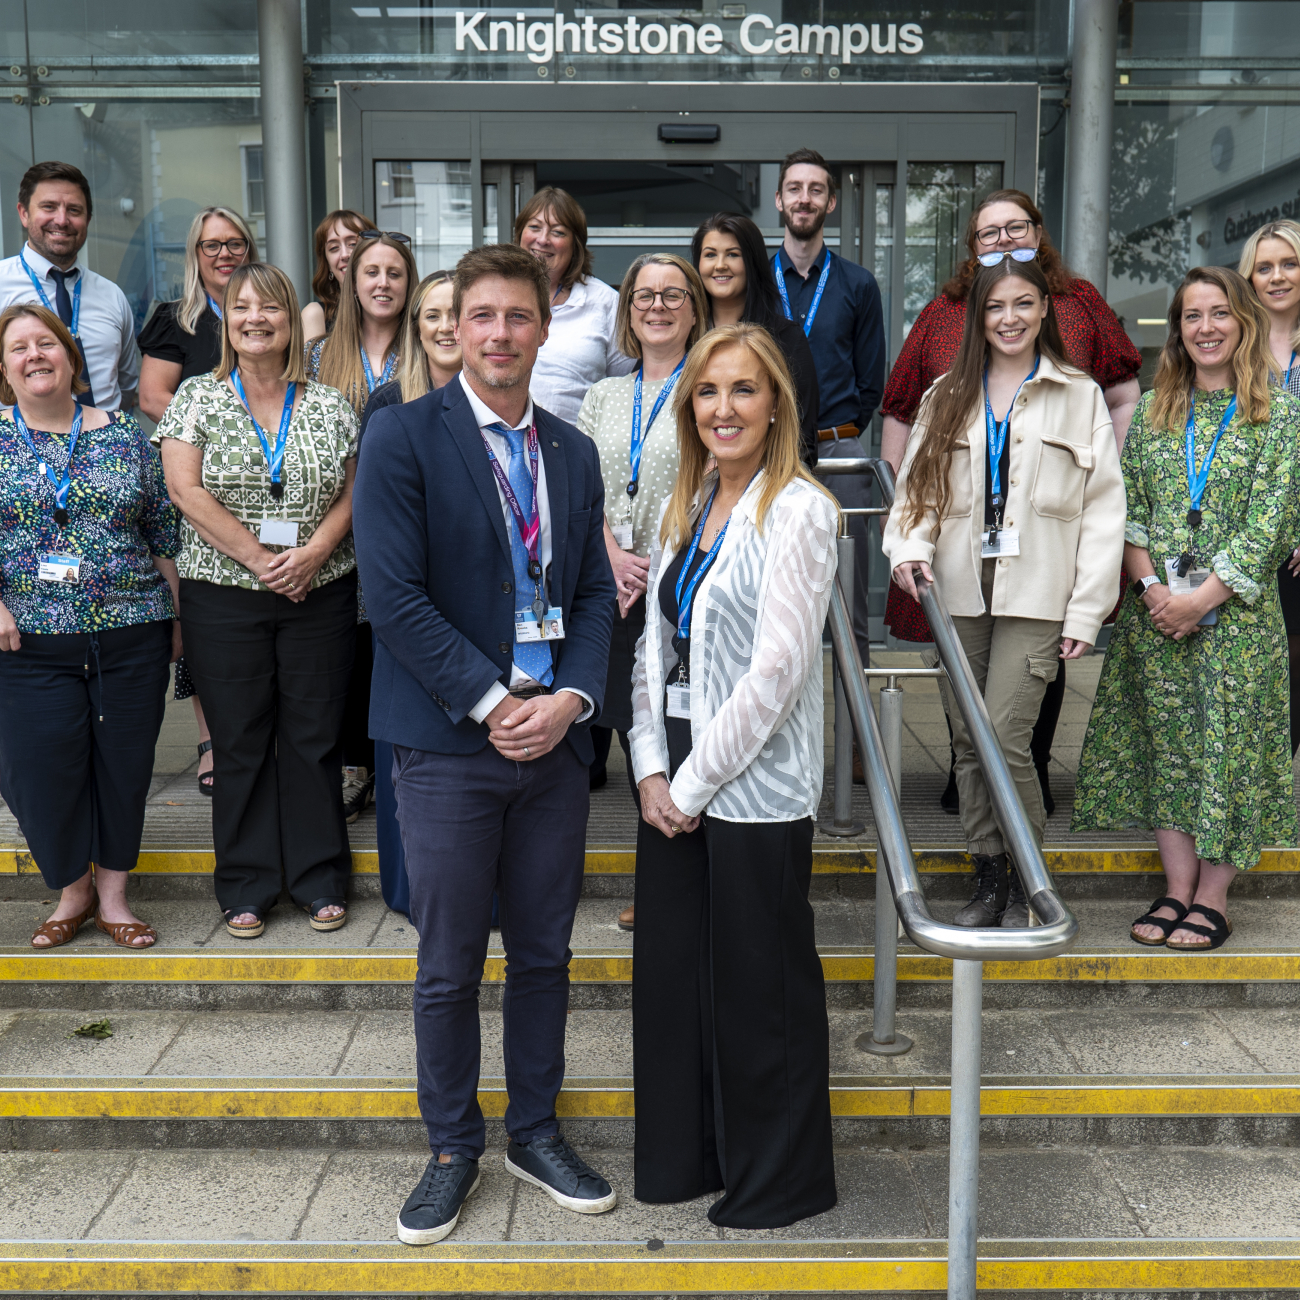 Staff gathered together in front of Knightstone celebrating the matrix accreditation